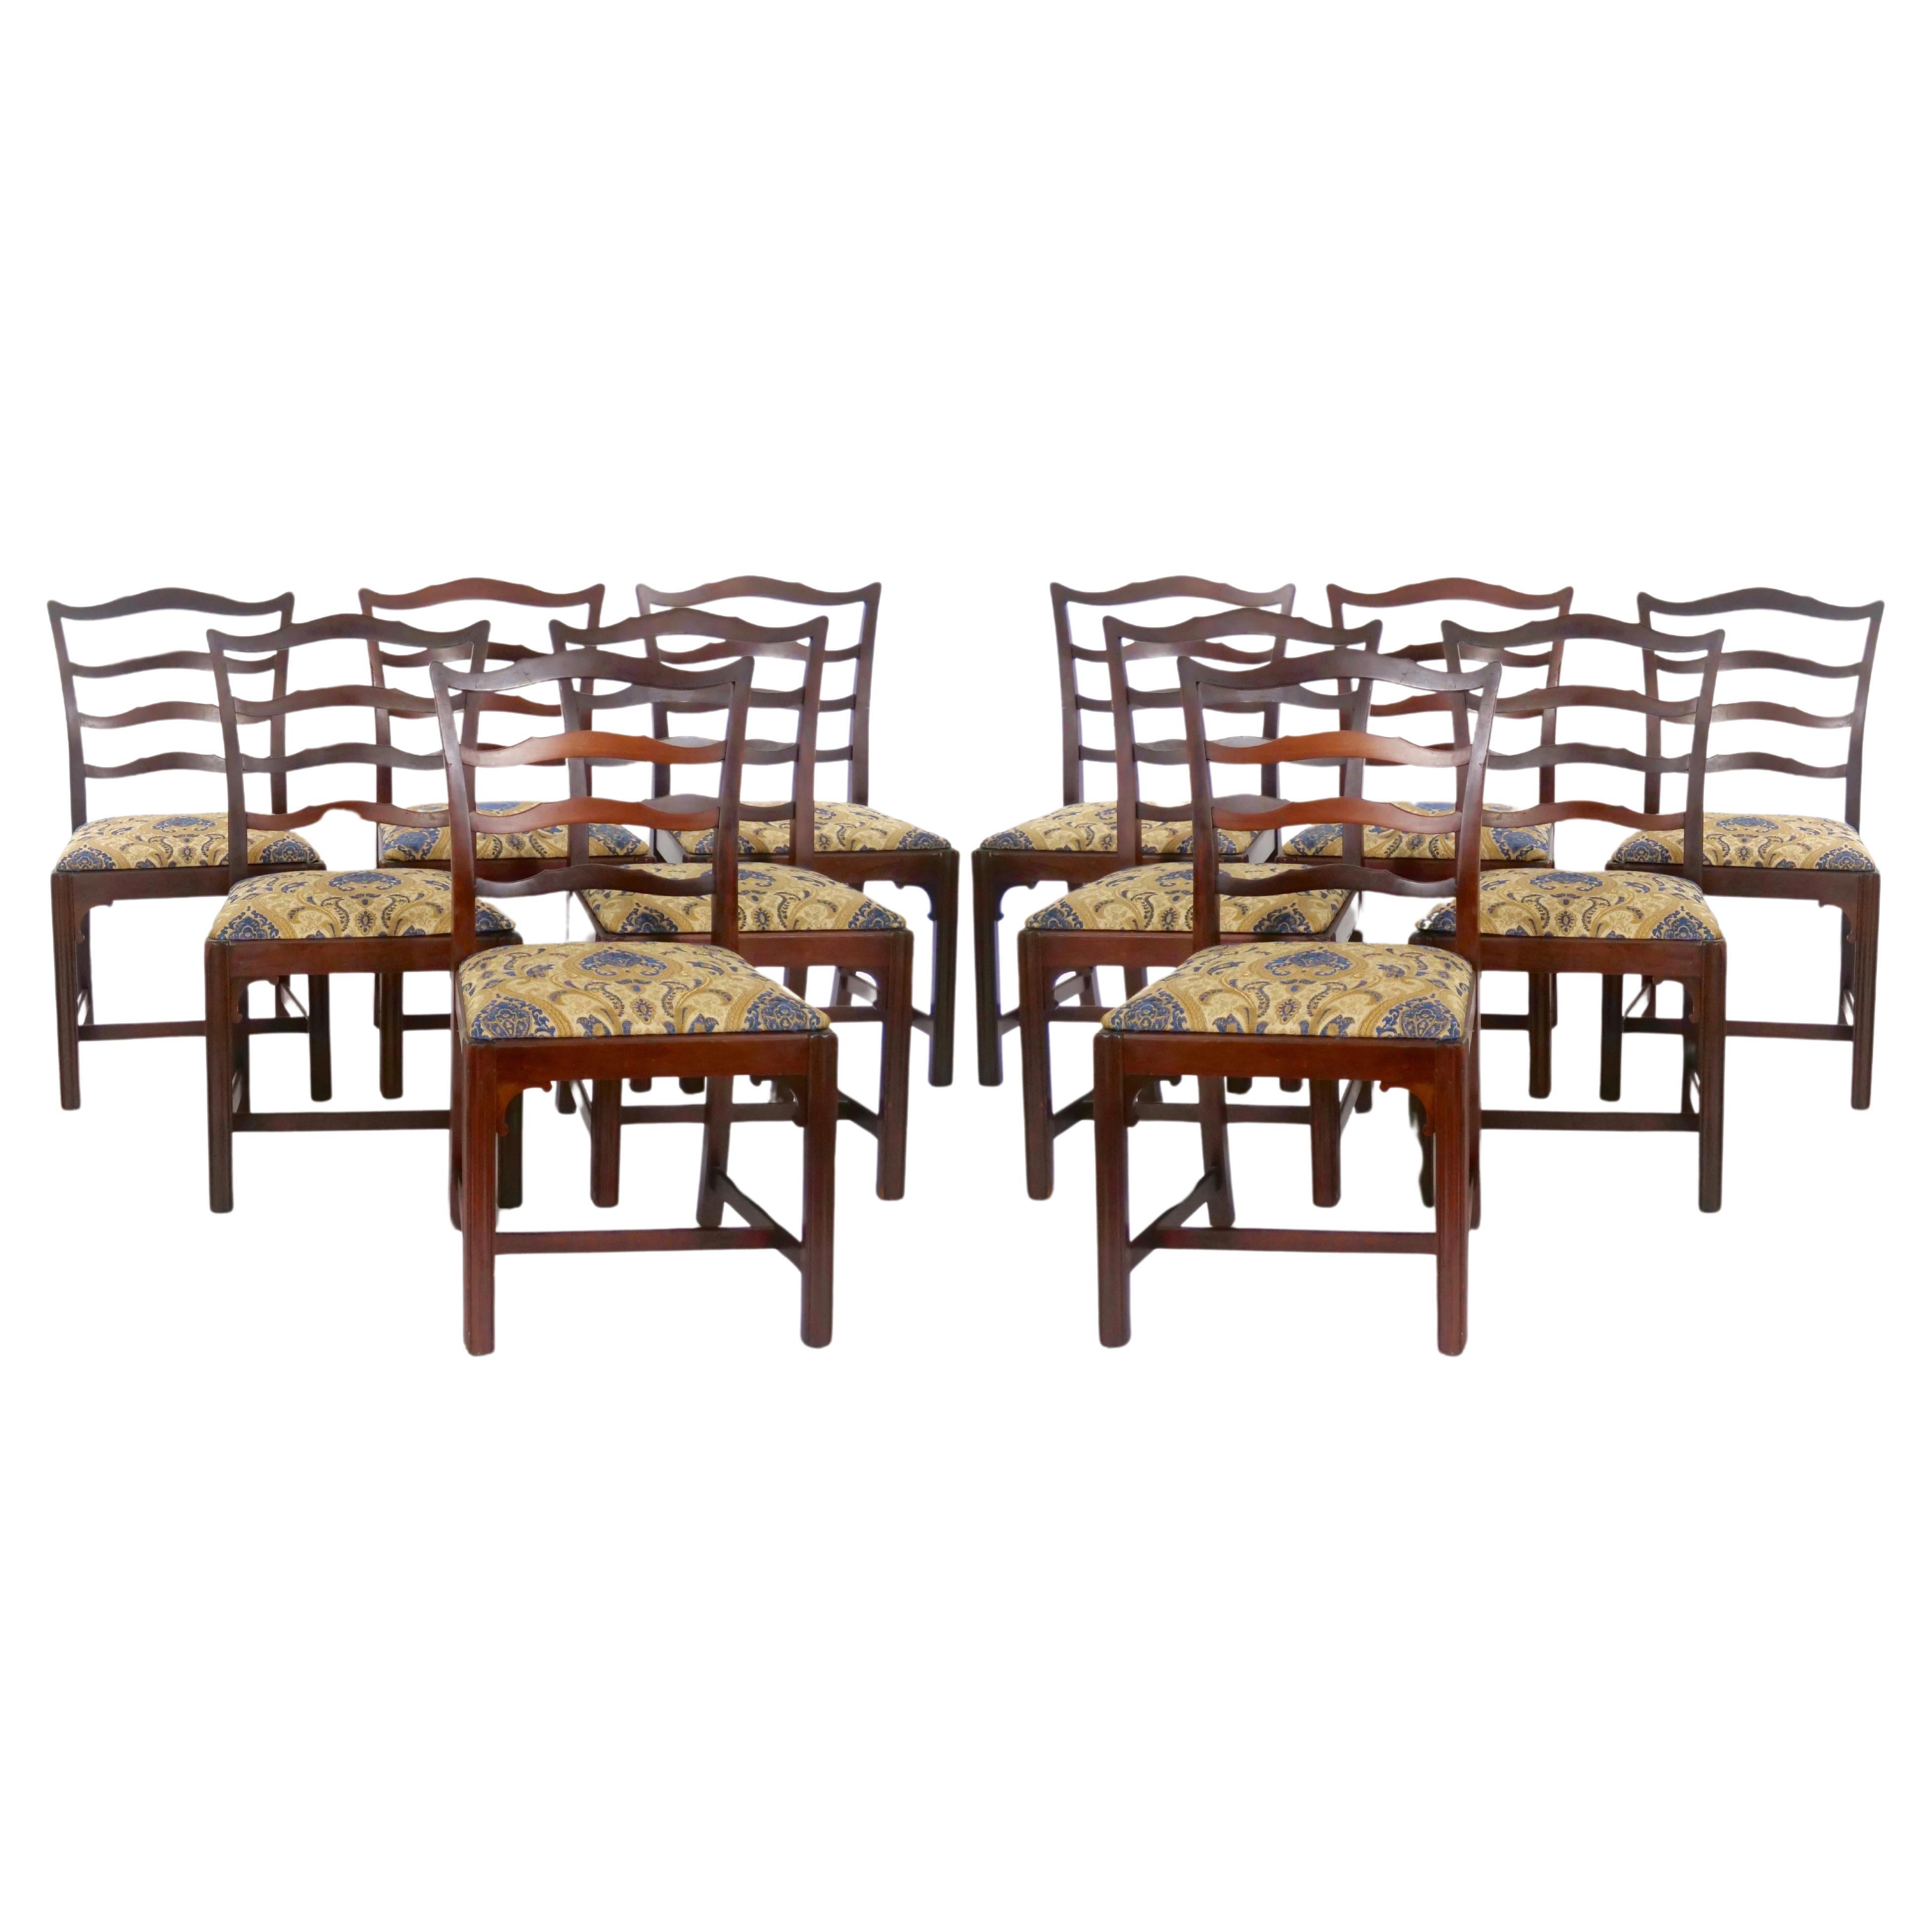 Introduce timeless elegance to your dining space with our exquisite set of 12 Antique Chippendale Style Ribbon Back Dining Chairs, crafted circa 1928. Each chair is a testament to the enduring allure of Chippendale design, featuring mahogany frames